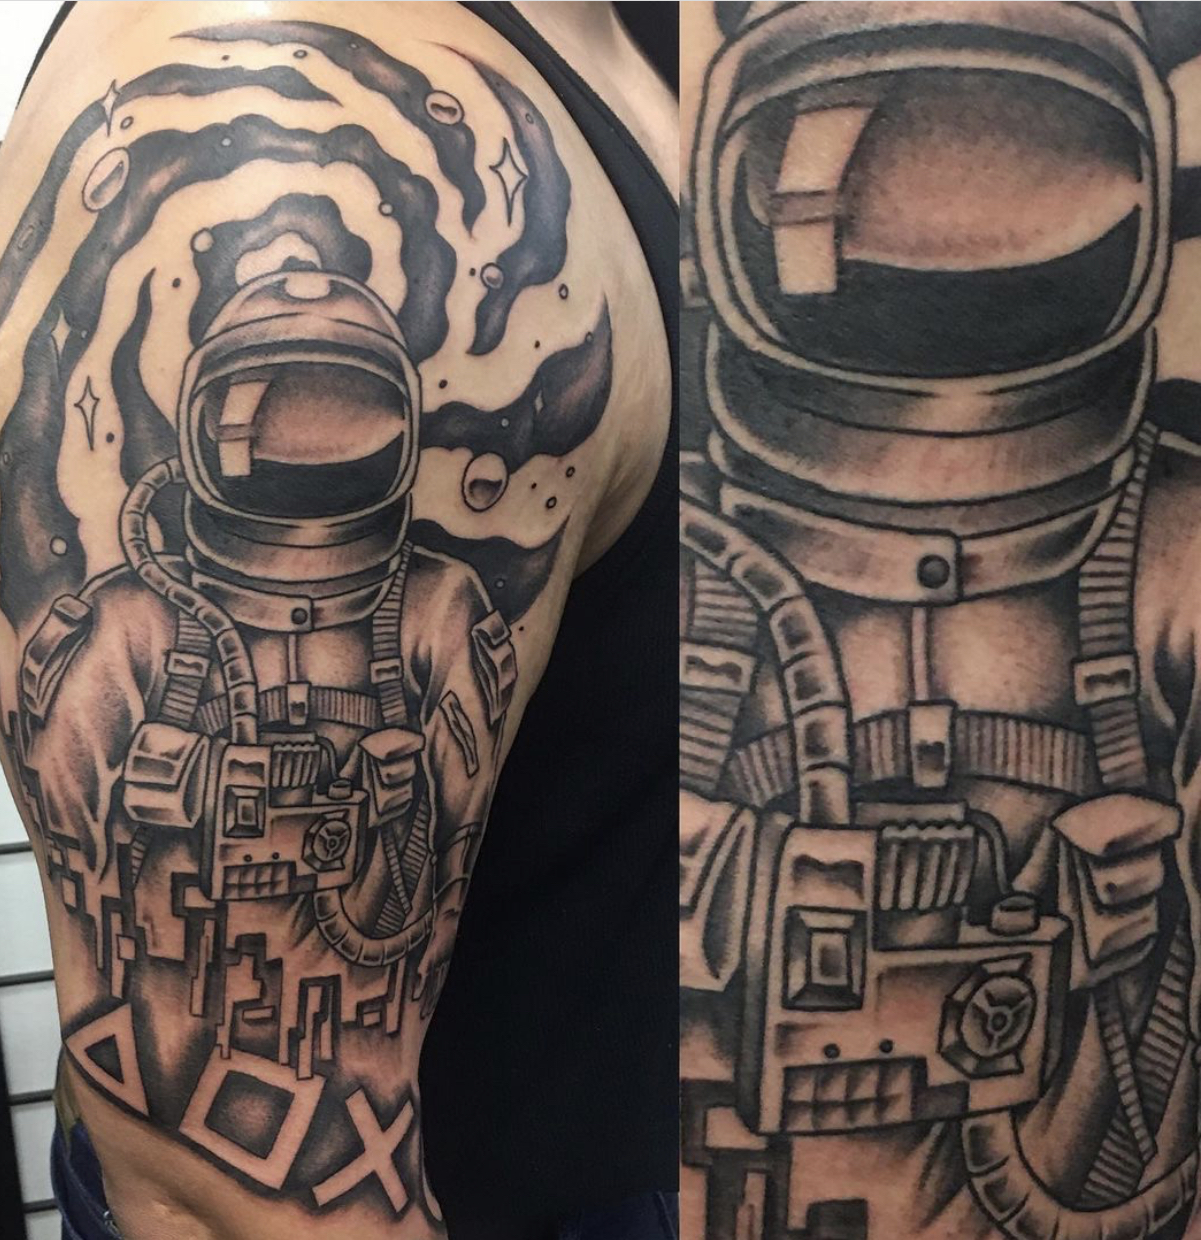 Astronaut tattoo from local tattoo shop in Texas